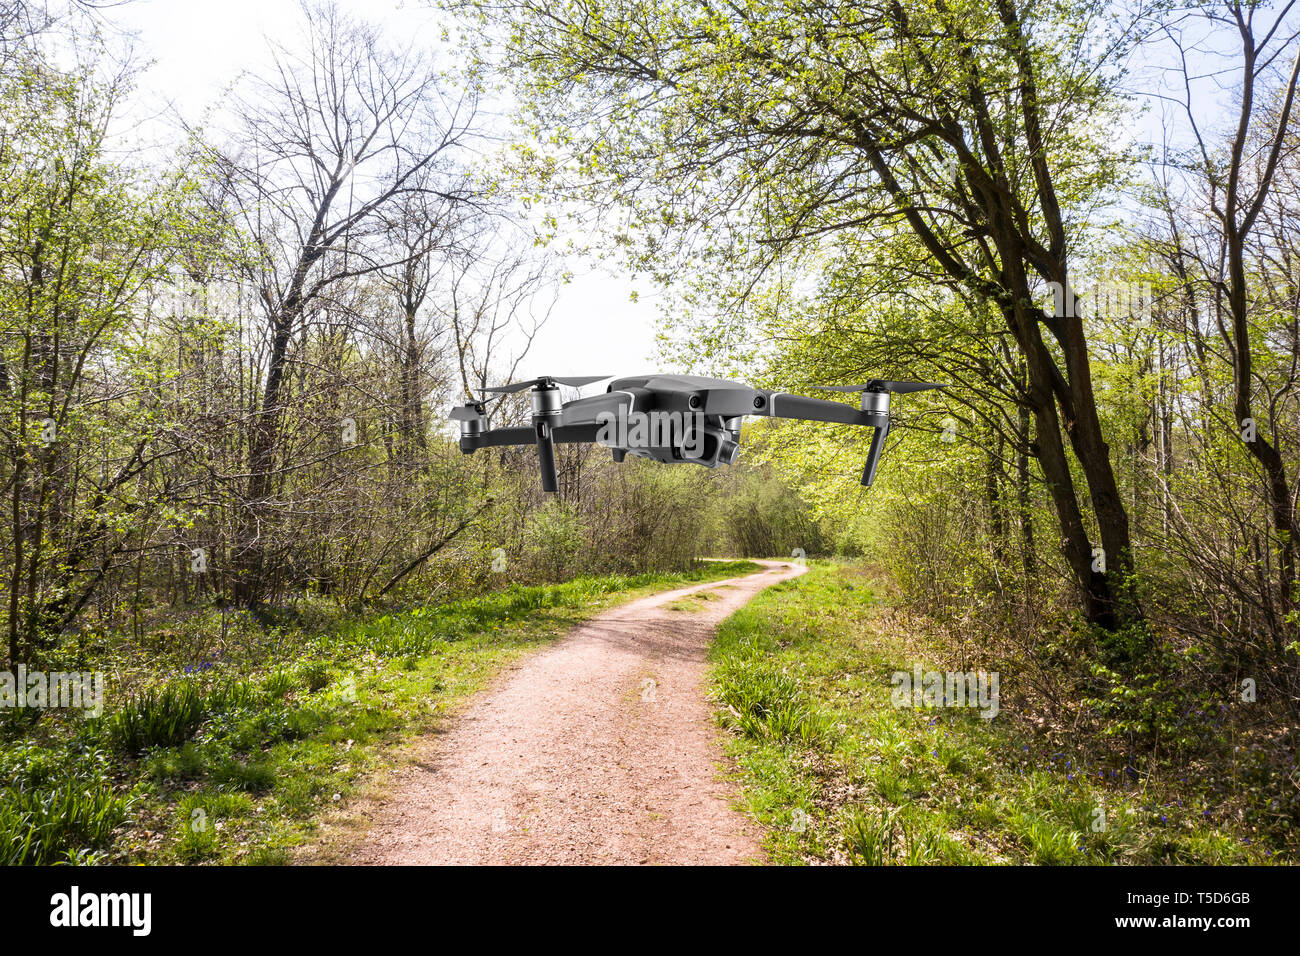 Drone in the woods, a drone flys in the  woods over the foot path Stock Photo